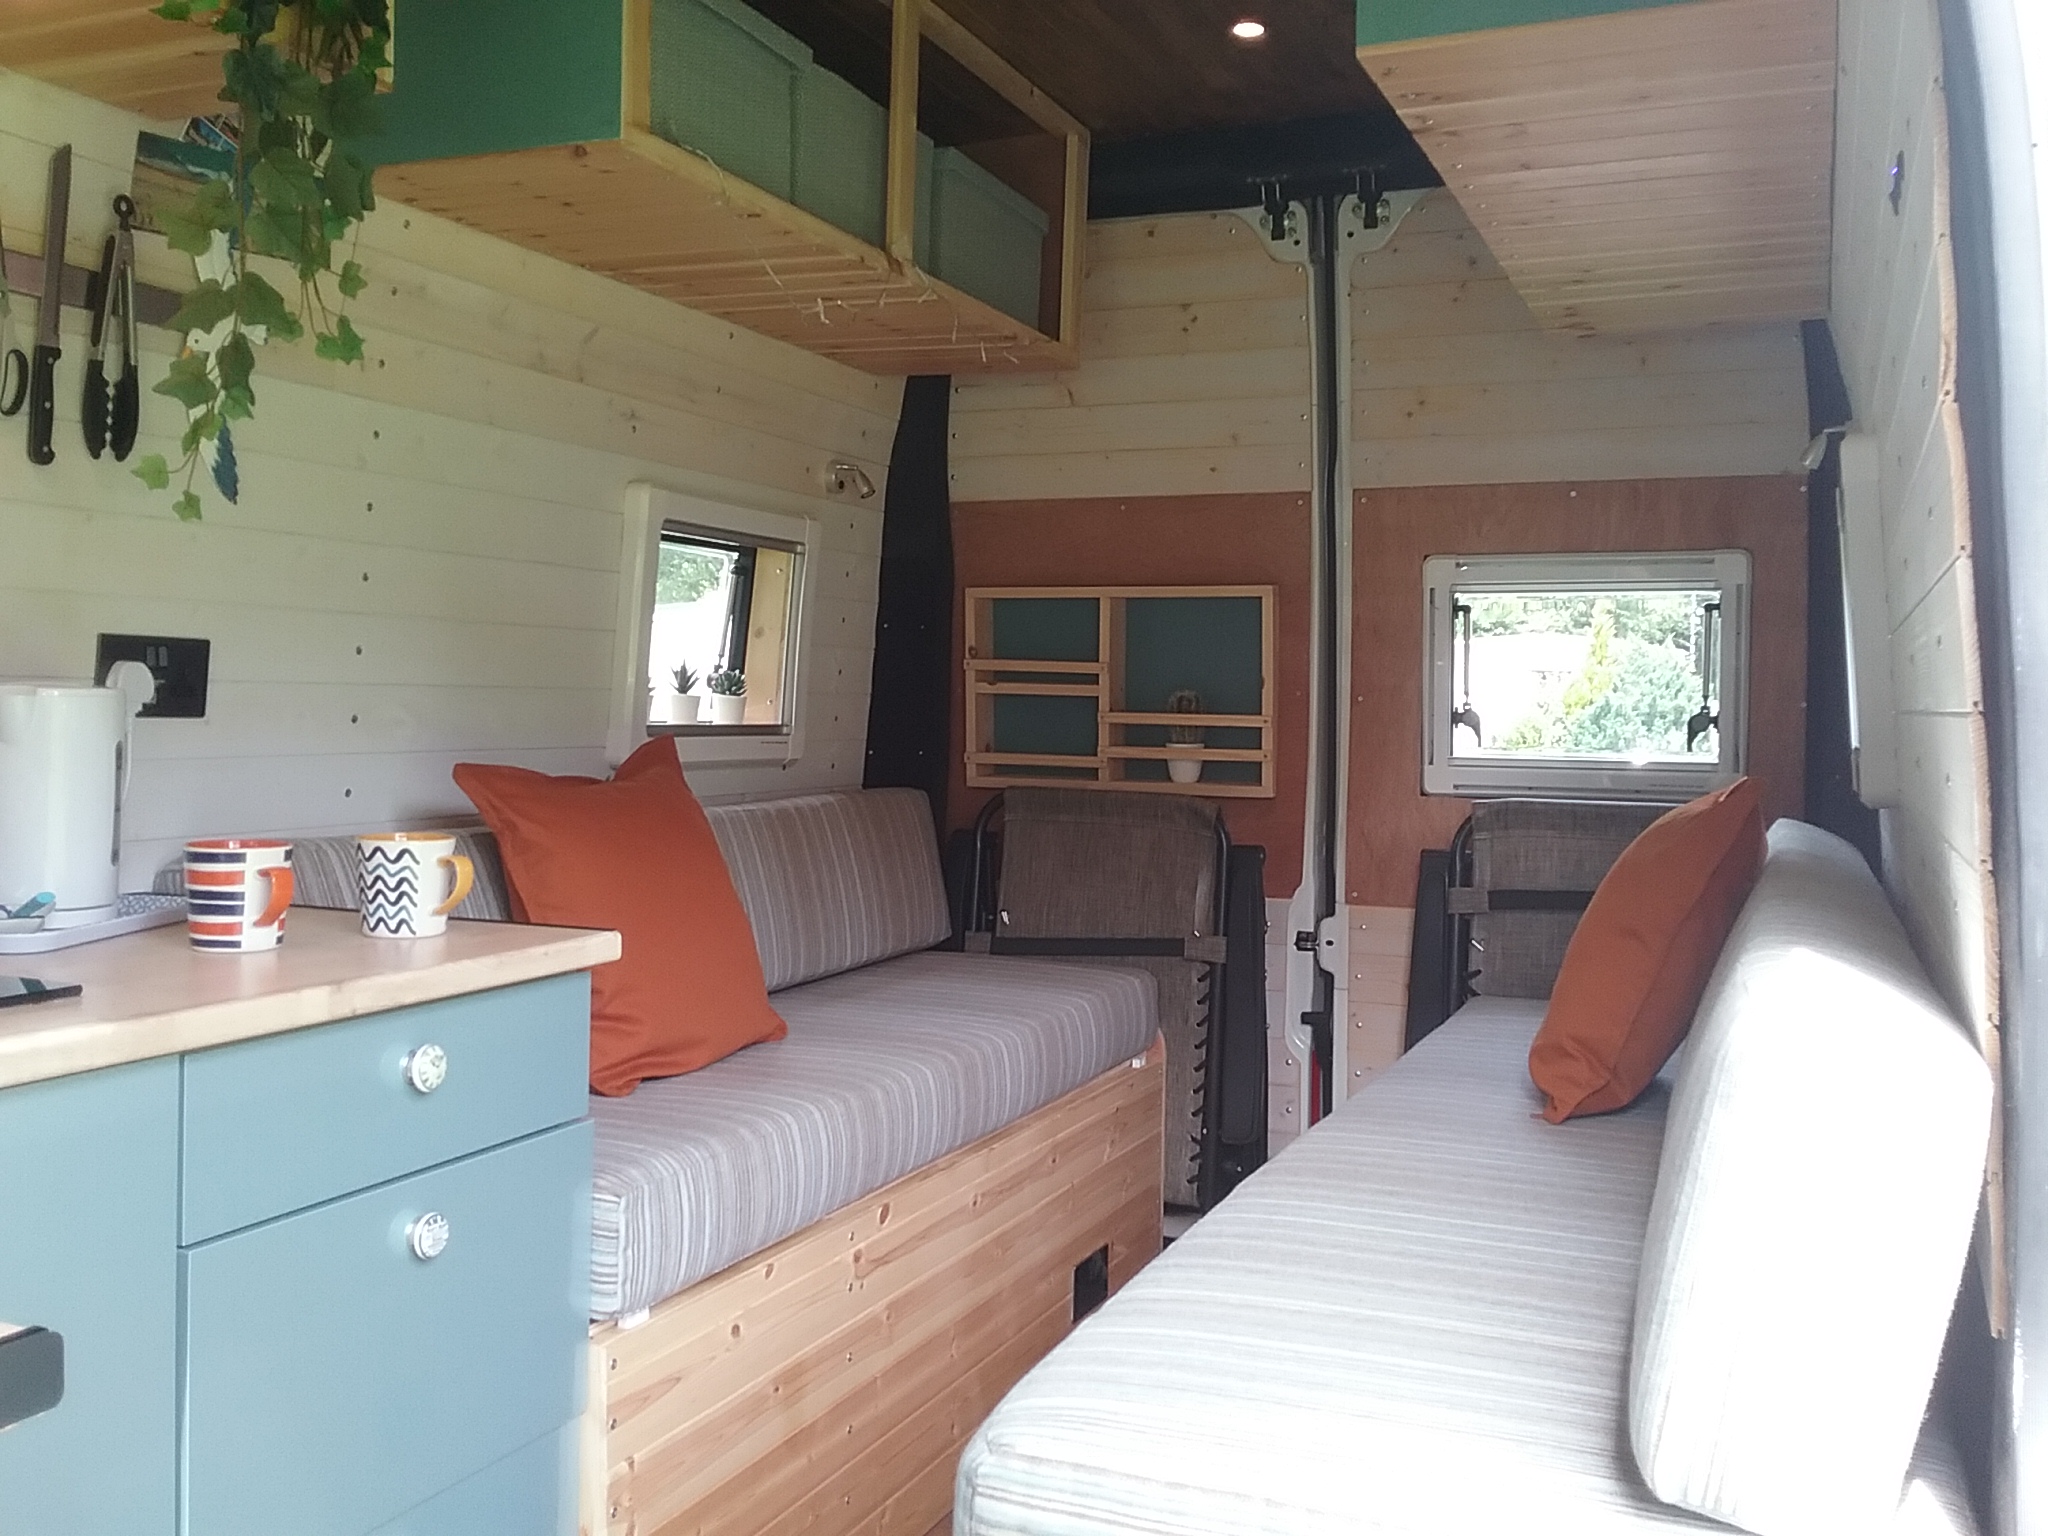 The interior of a converted camper van features two cushioned benches with orange pillows, a small kitchen area with cupboards and a countertop, hanging plants, and a window on each side. The walls and ceiling are finished in light wood. There is also a small set of shelves on the back wall.